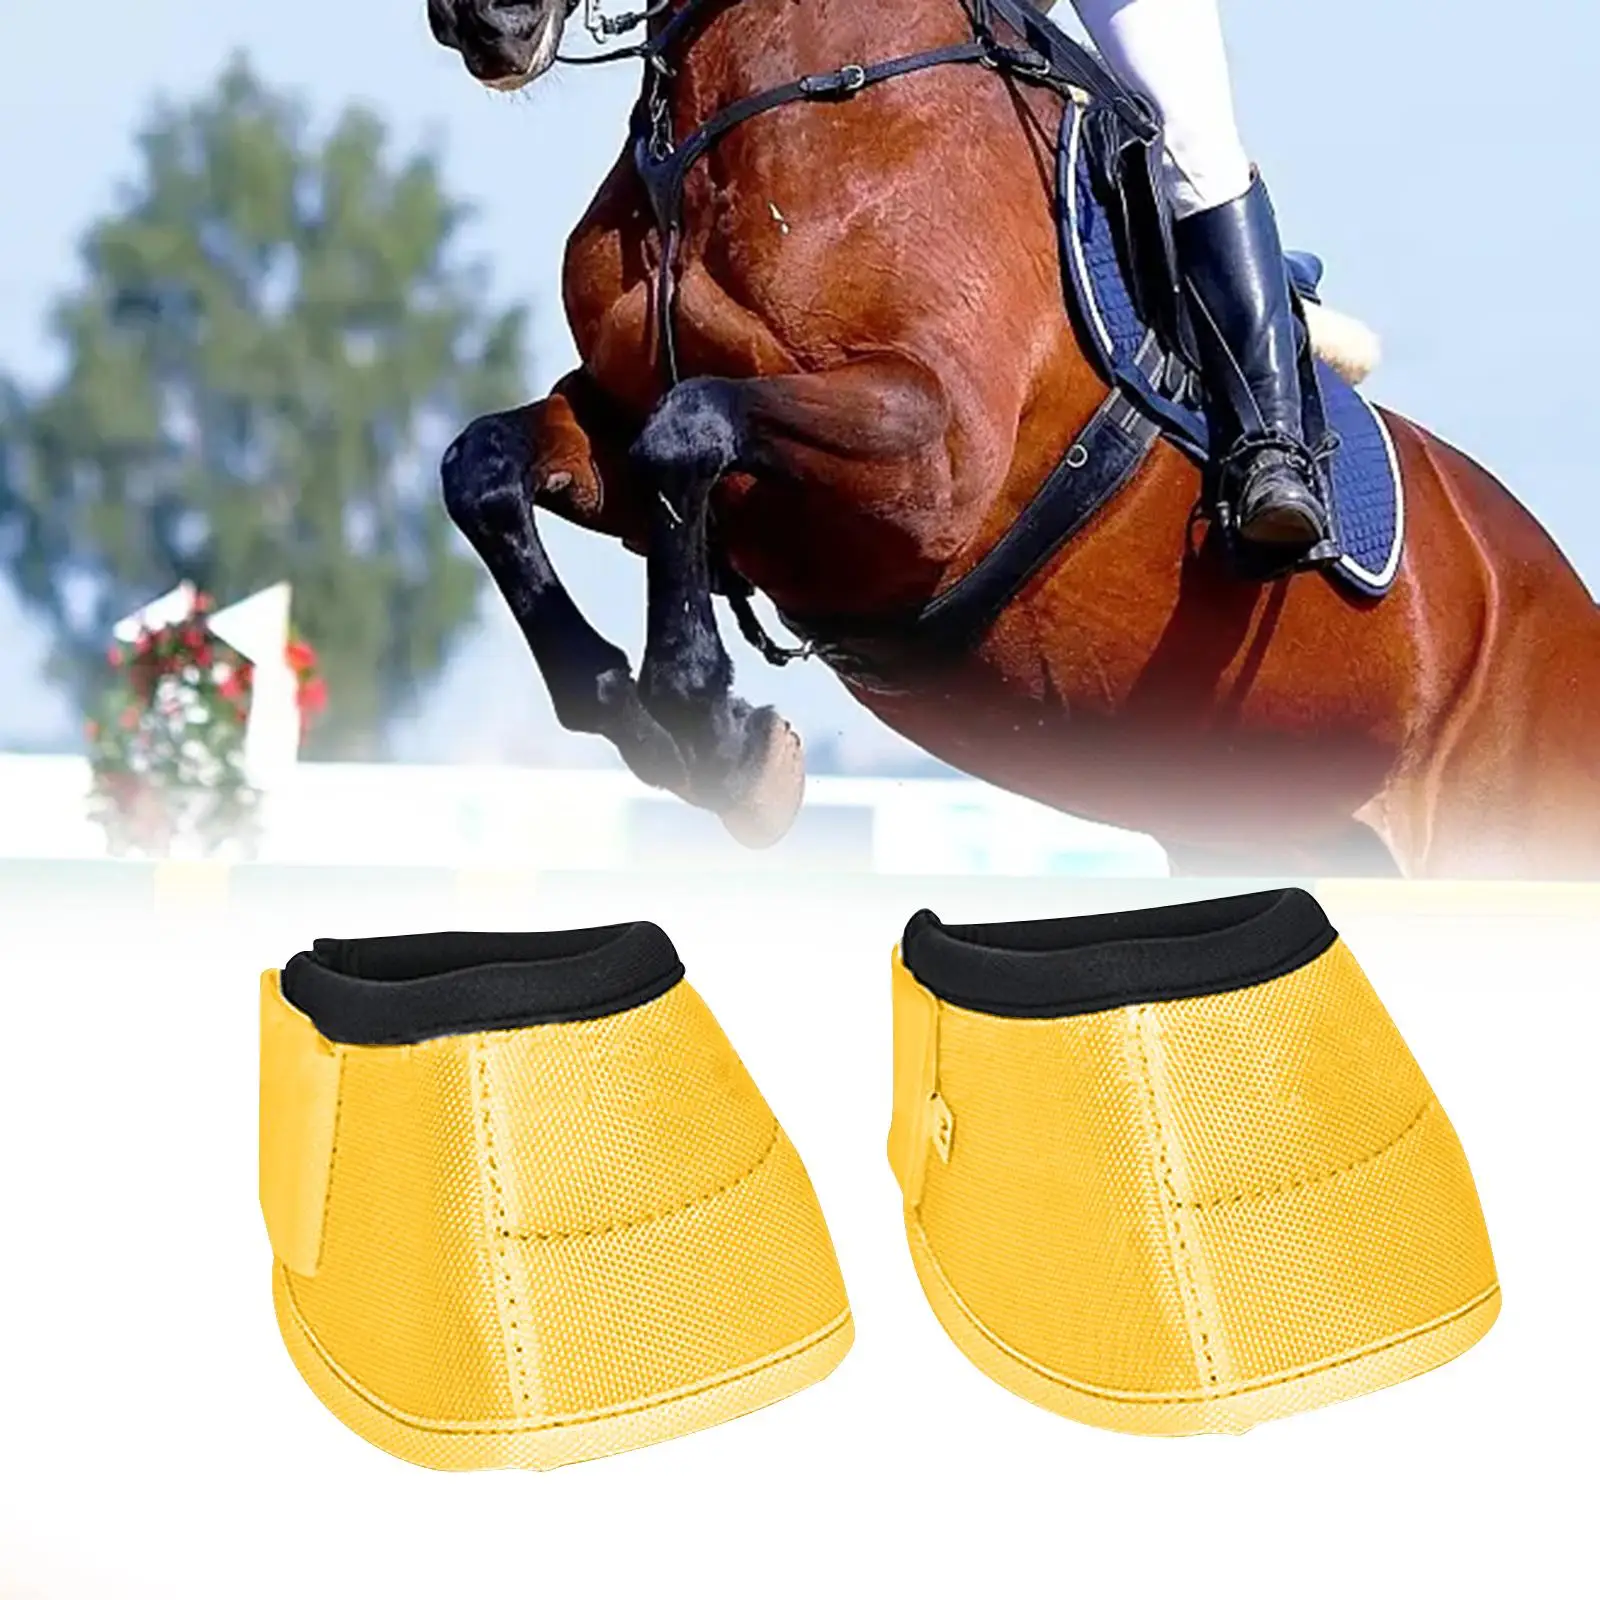 2Pcs Horse Bell Boots Horse Care Boot Durable 1680D Oxford Cloth Tear Resistant Shock Absorbing Lining for Riding and Turnout